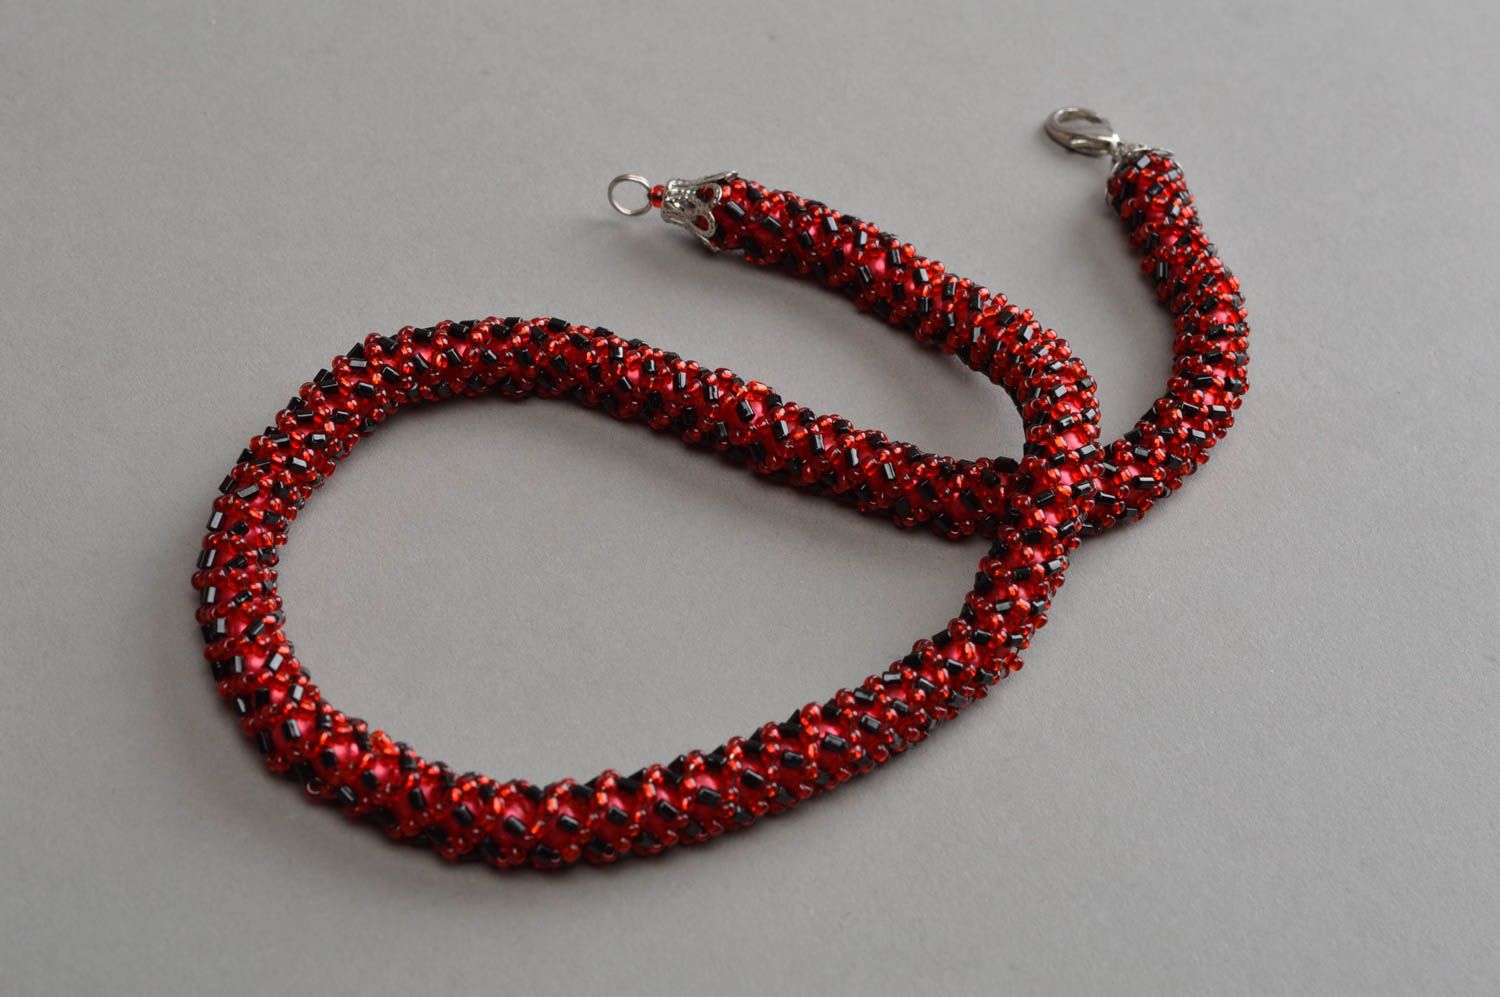 Stylish handmade beaded cord necklace unusual necklace designs womens jewelry photo 3